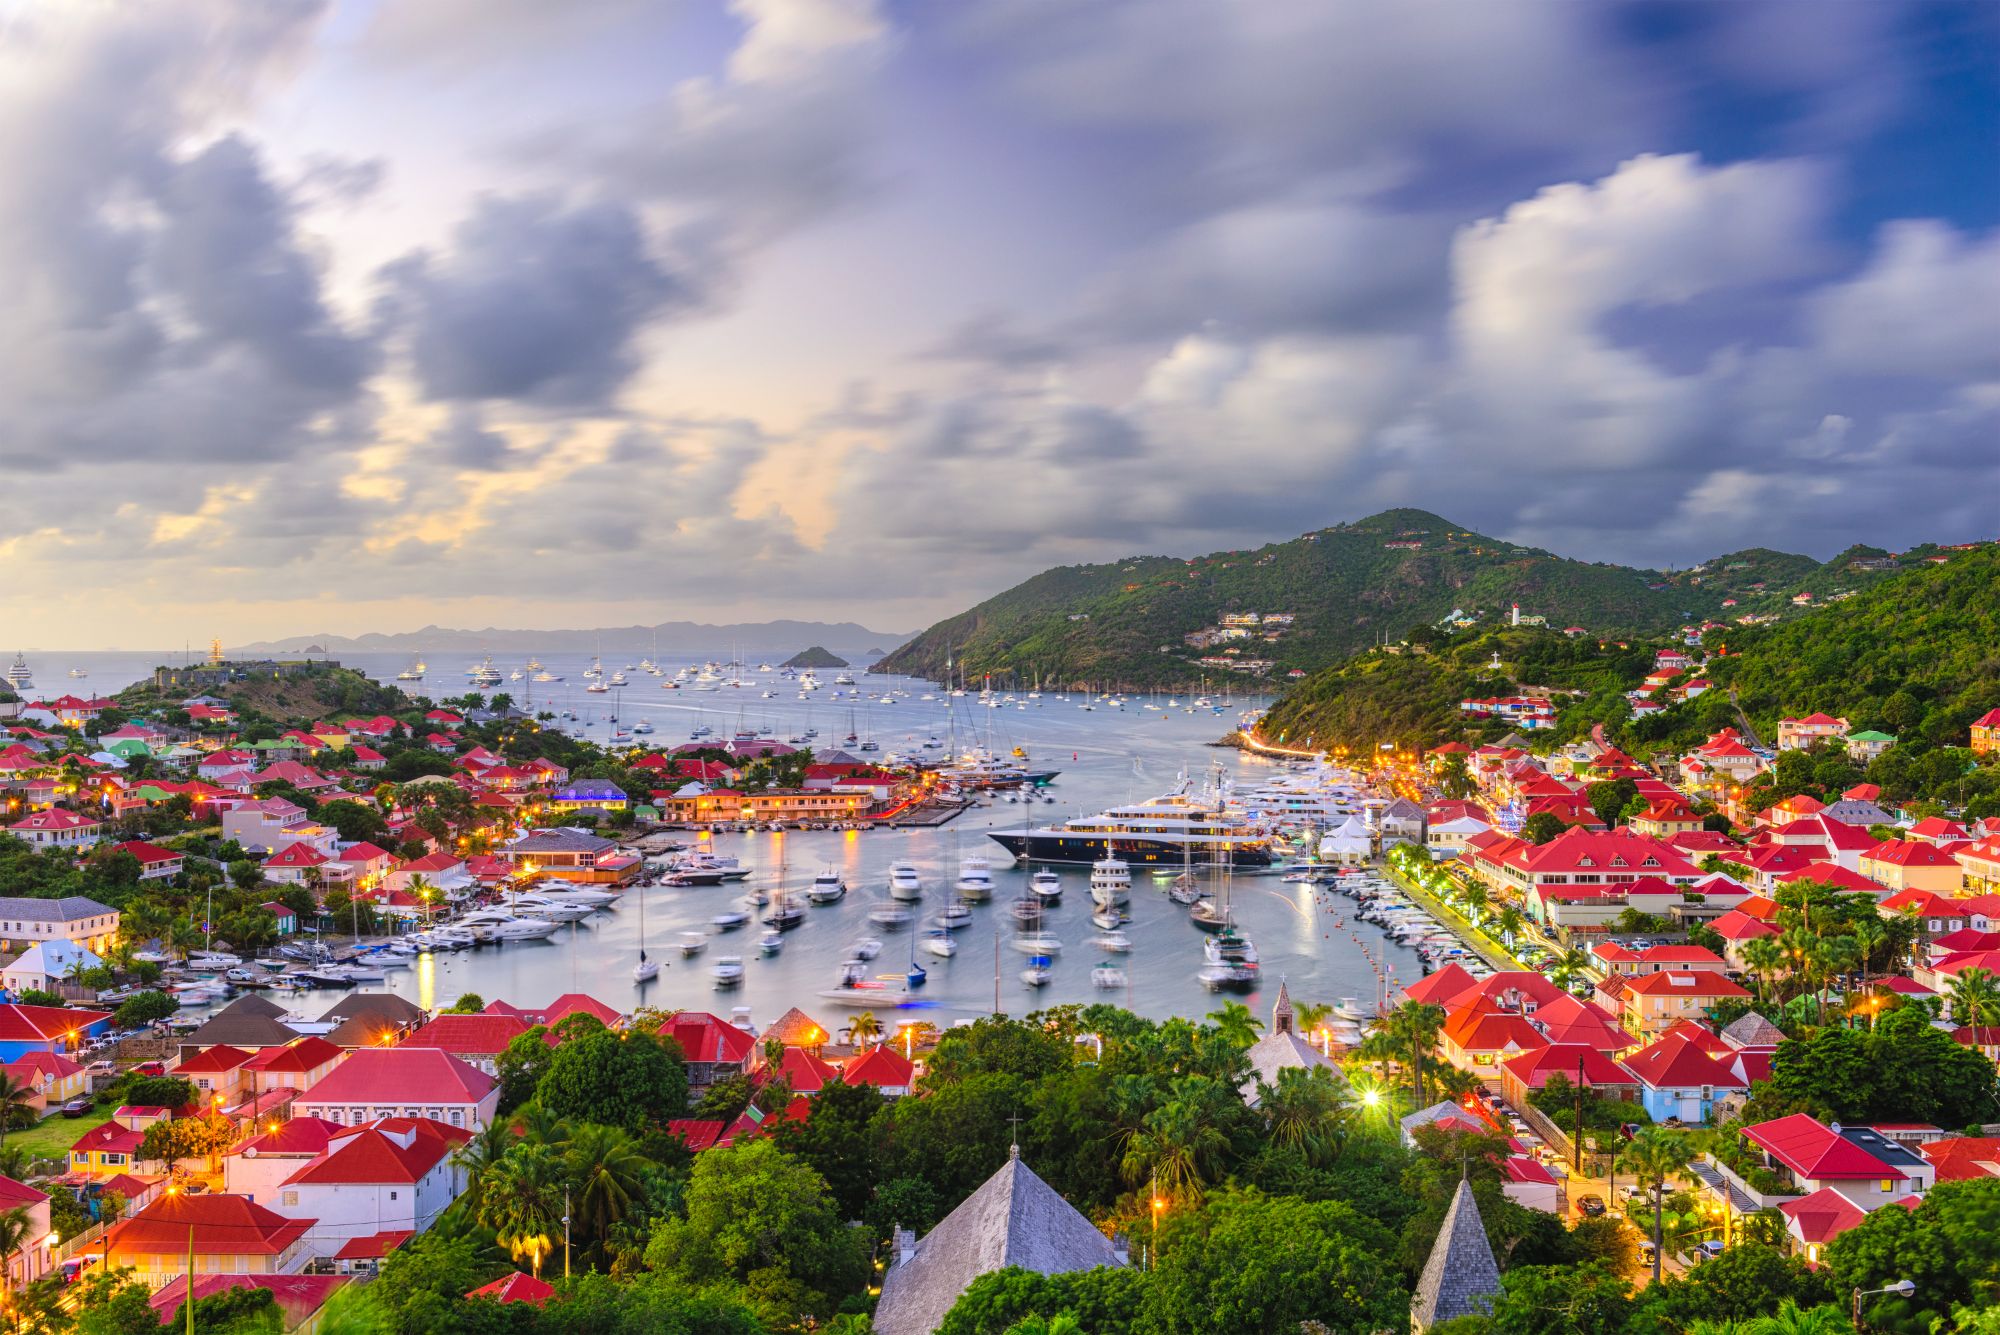 8 Quintessential Must-Do's In St. Barts - Jetset Times